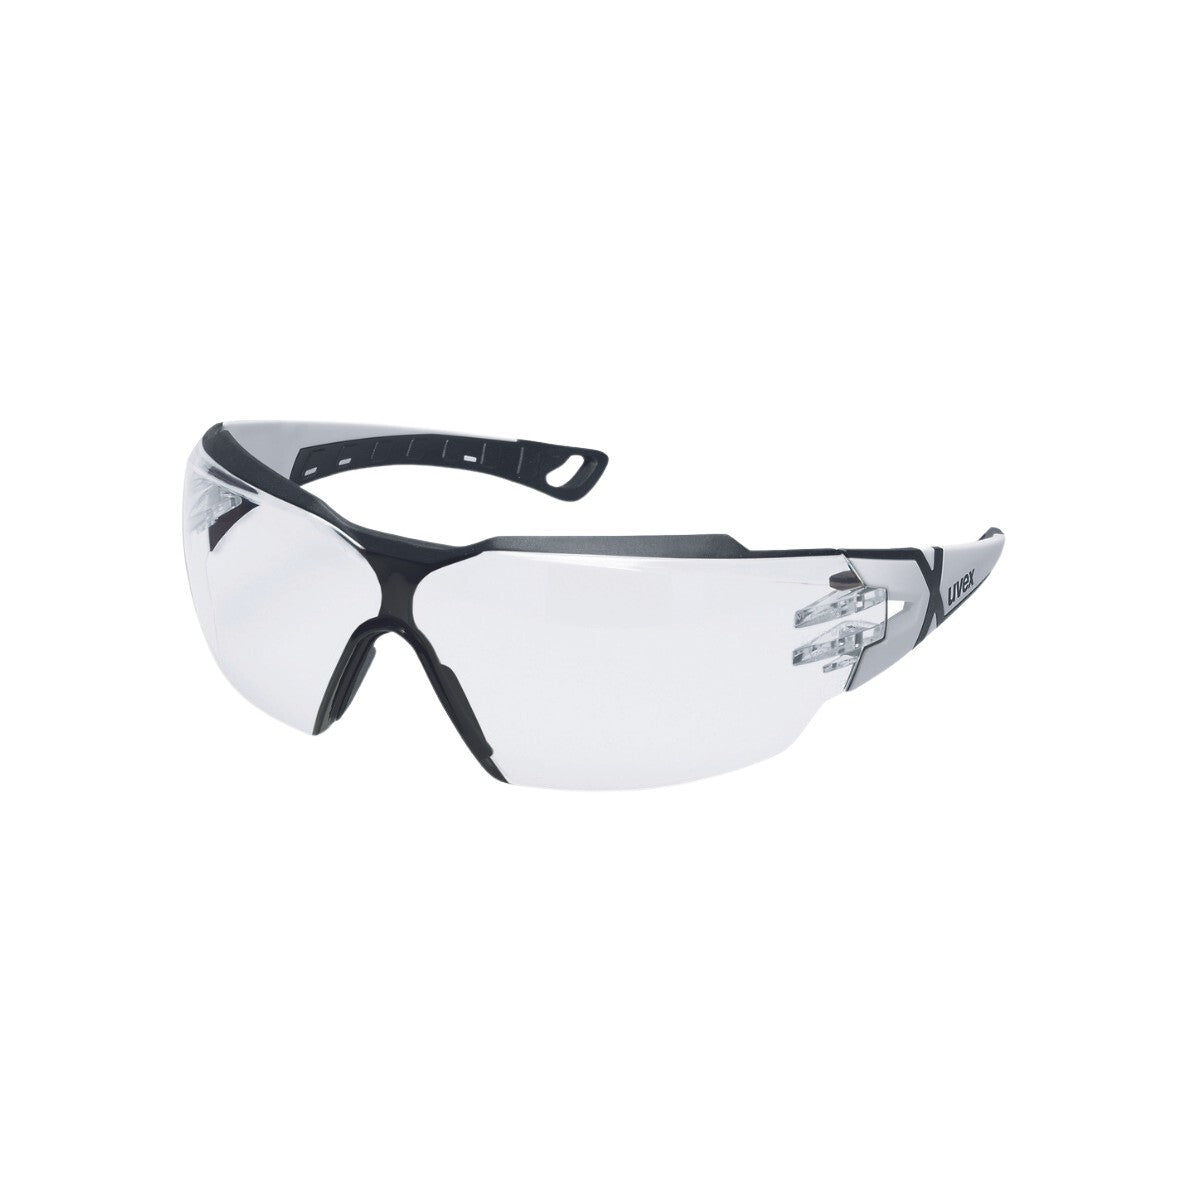 uvex pheos cx2 Safety Glasses - Clear Lens 9198-202 (Pack of 5)